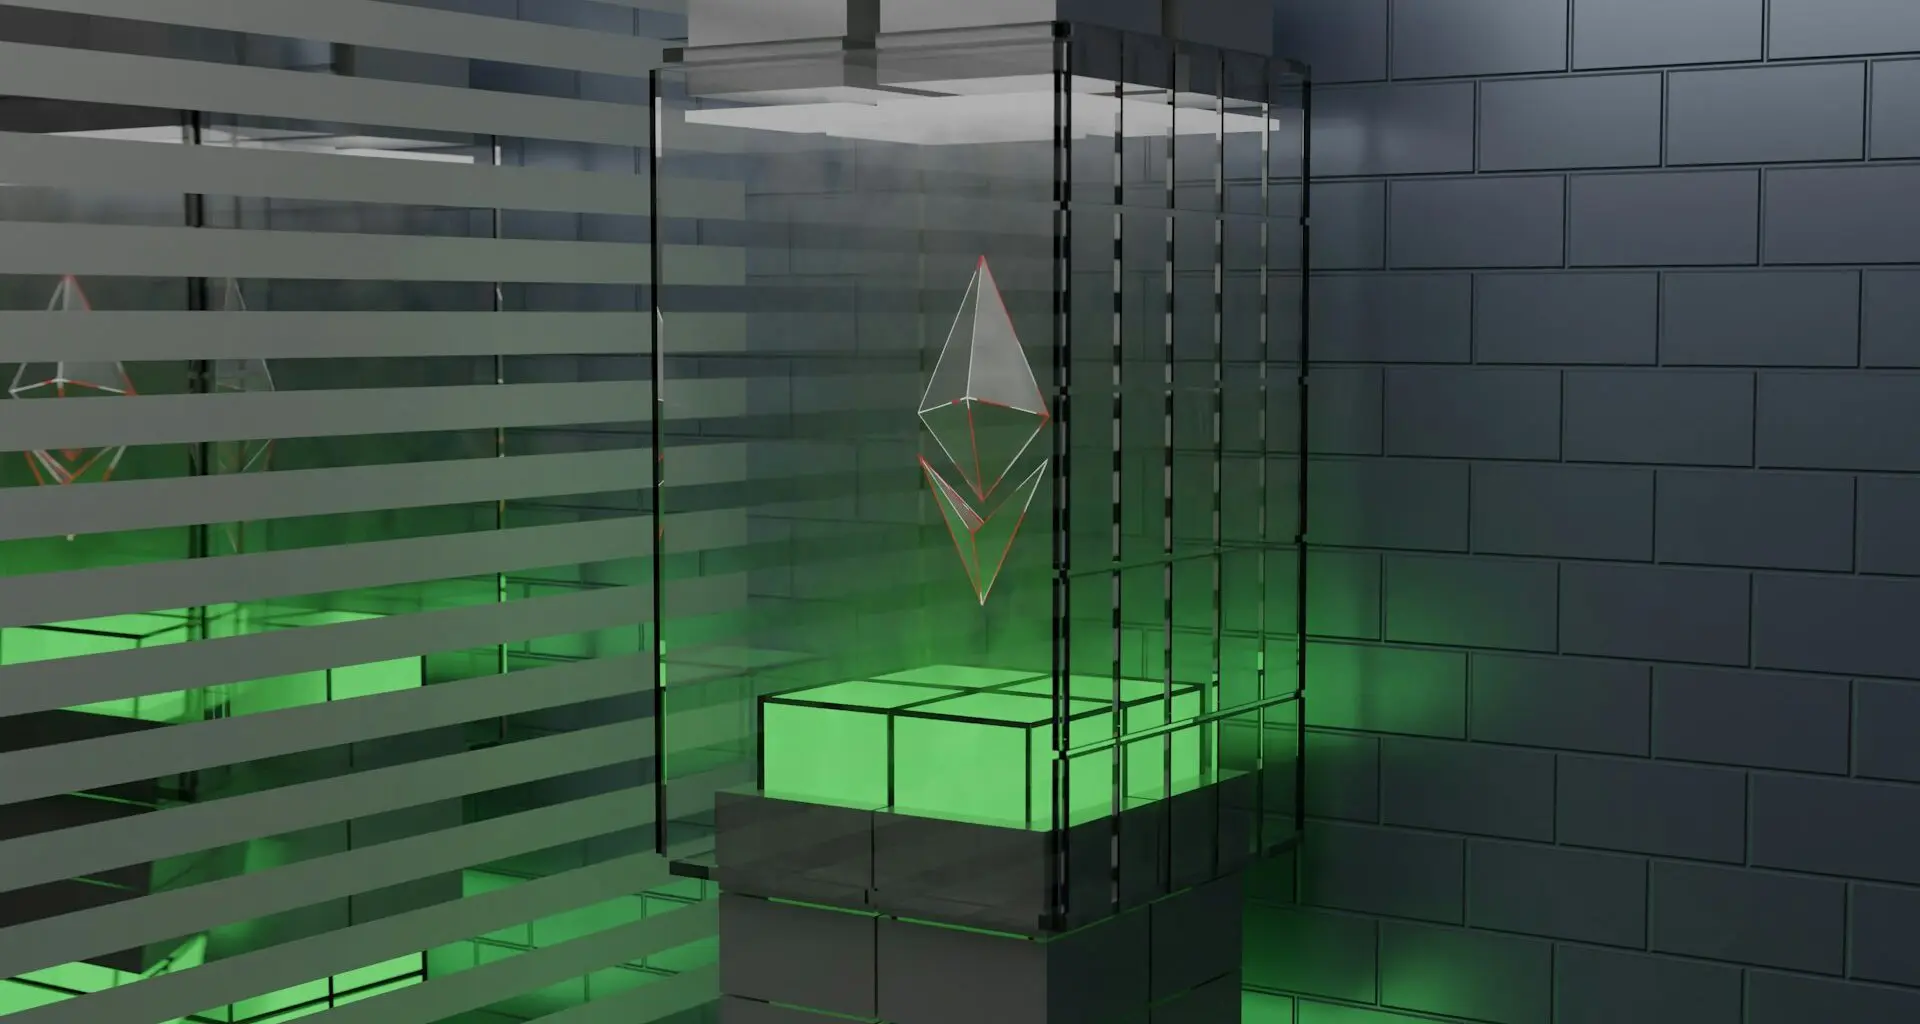 A 3D-rendered image of an Ethereum logo inside a futuristic, illuminated glass chamber with green lighting.